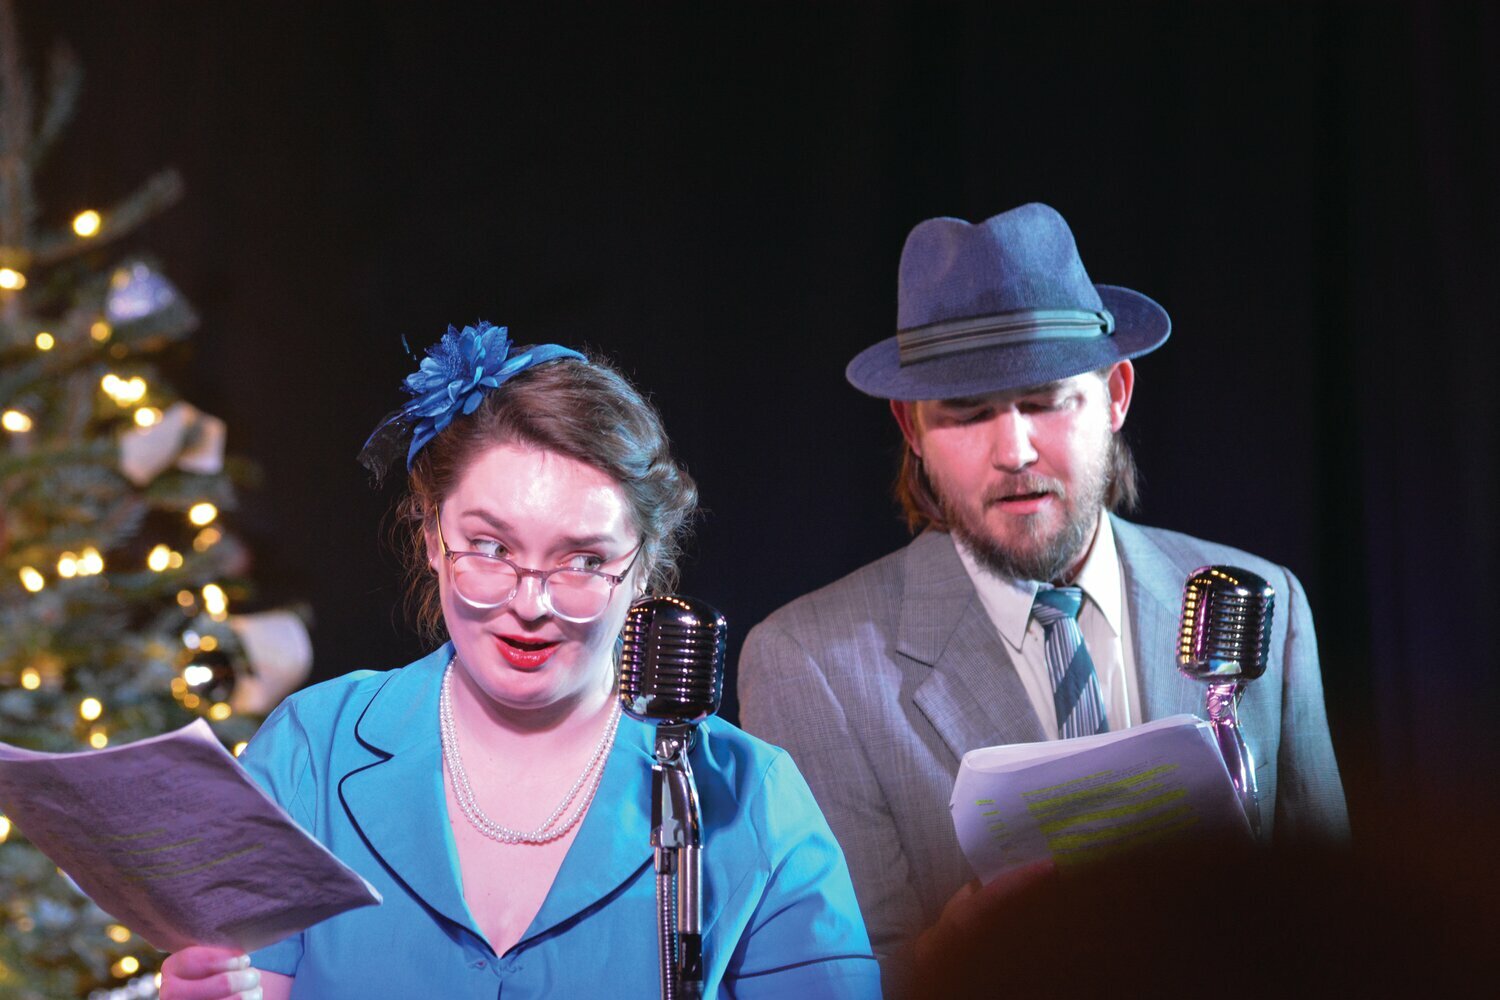 Wes Williams and Kamylle Springer perform a scene of “It’s a Wonderful Life” on Dec. 10 at Yelm’s Outpost Church.